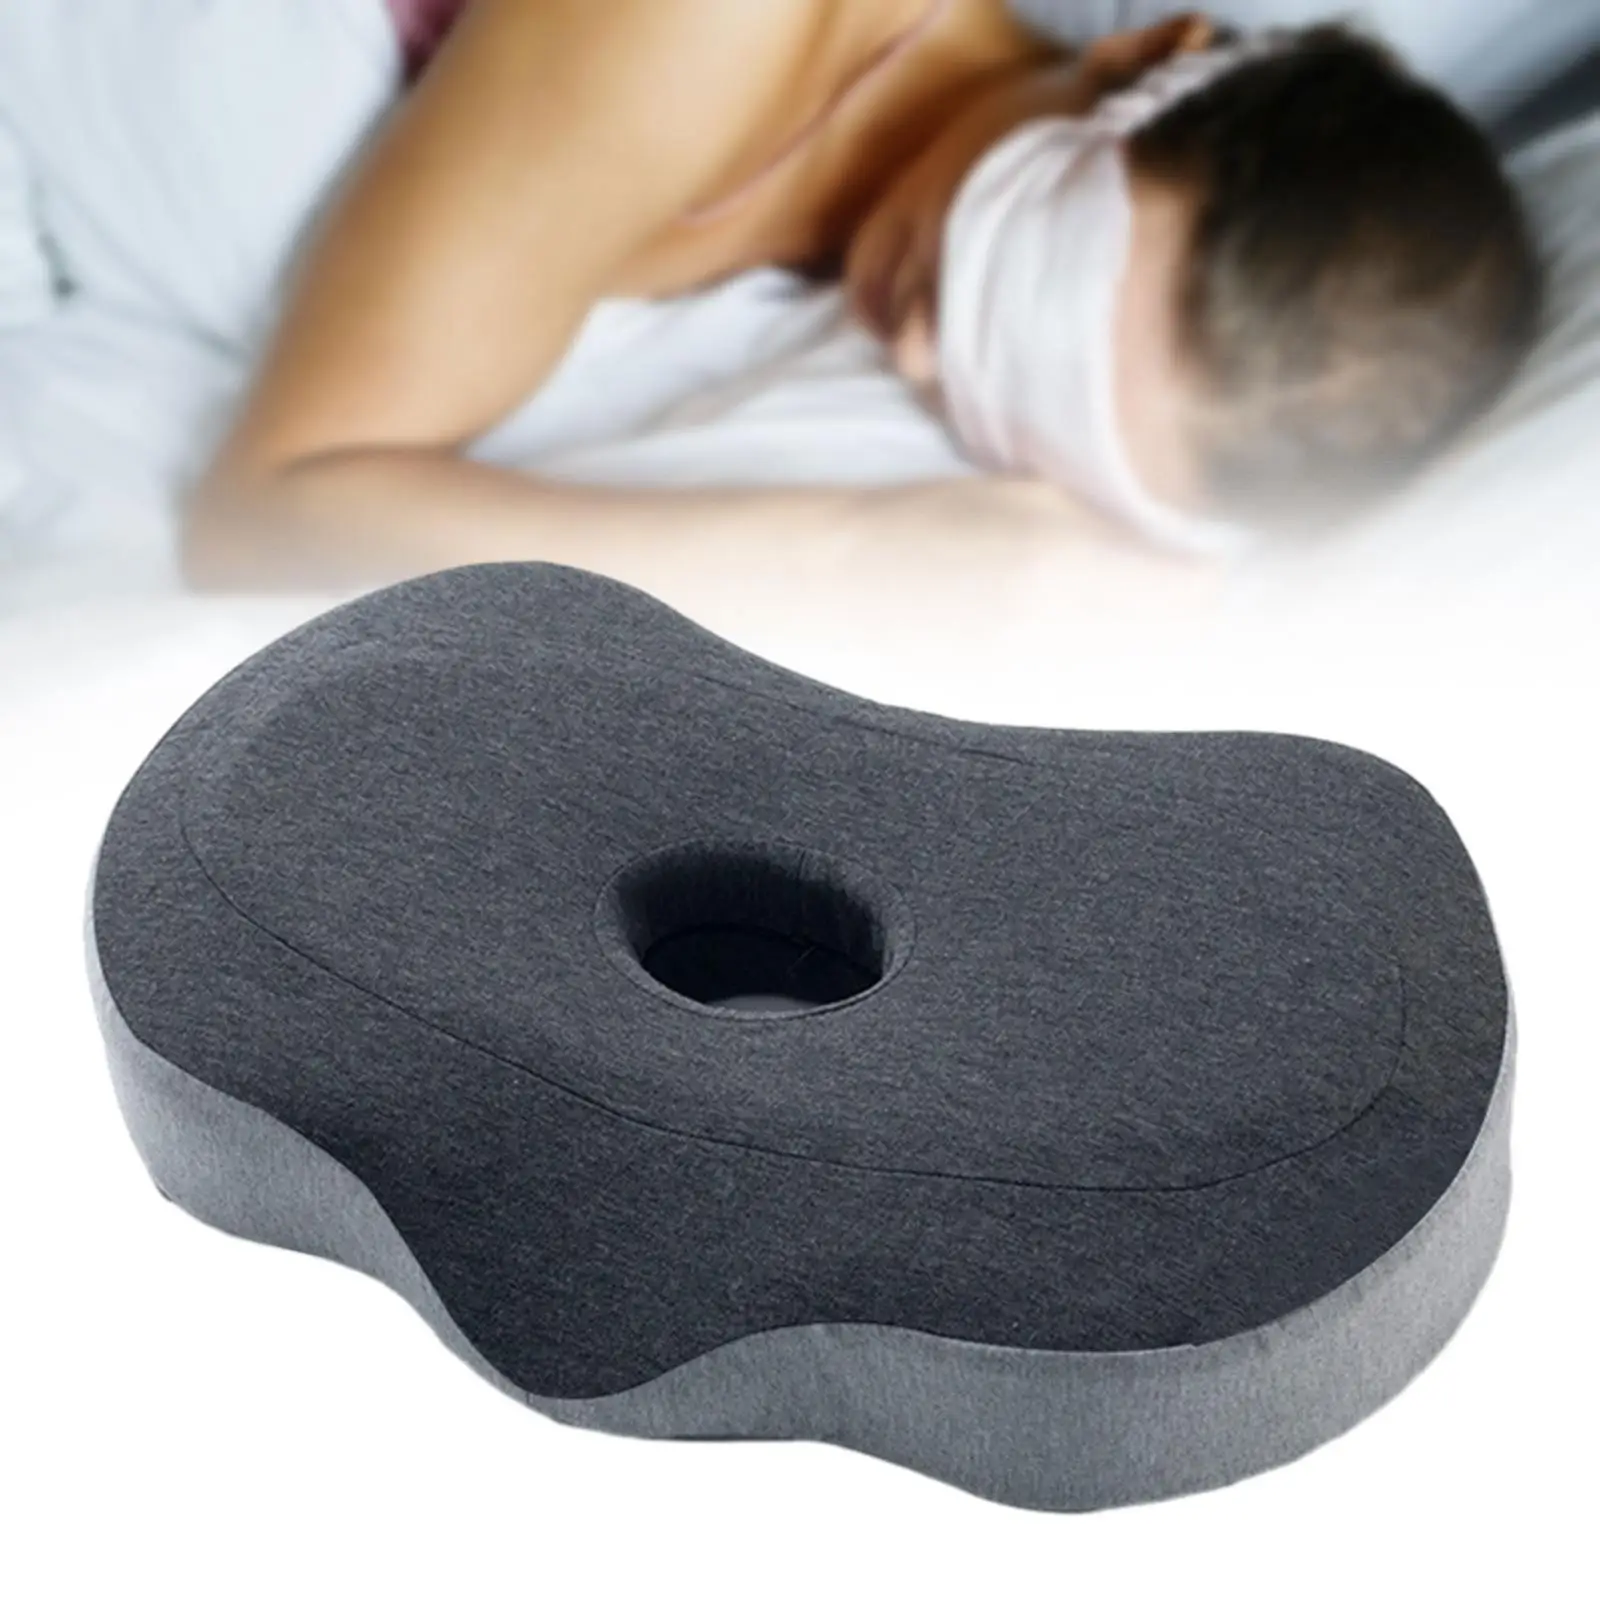 Ear Piercing Pillow Washable Guard Protector for Side Sleepers Holiday Gifts